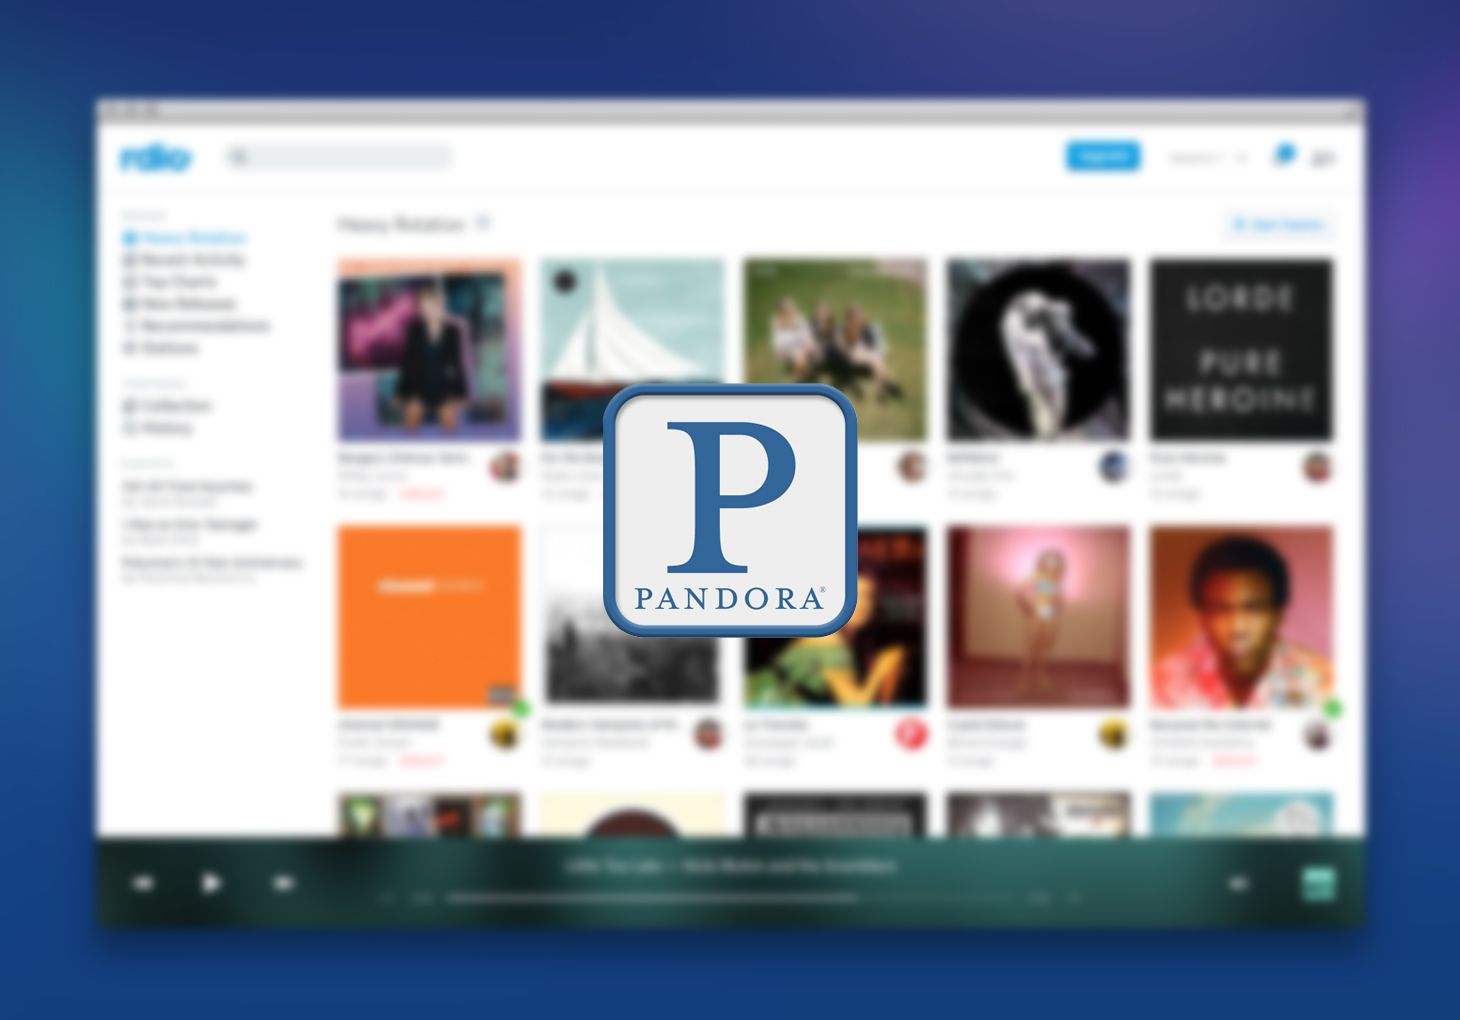 pandora wants to buy and shut down rdio as it files for bankruptcy image 1